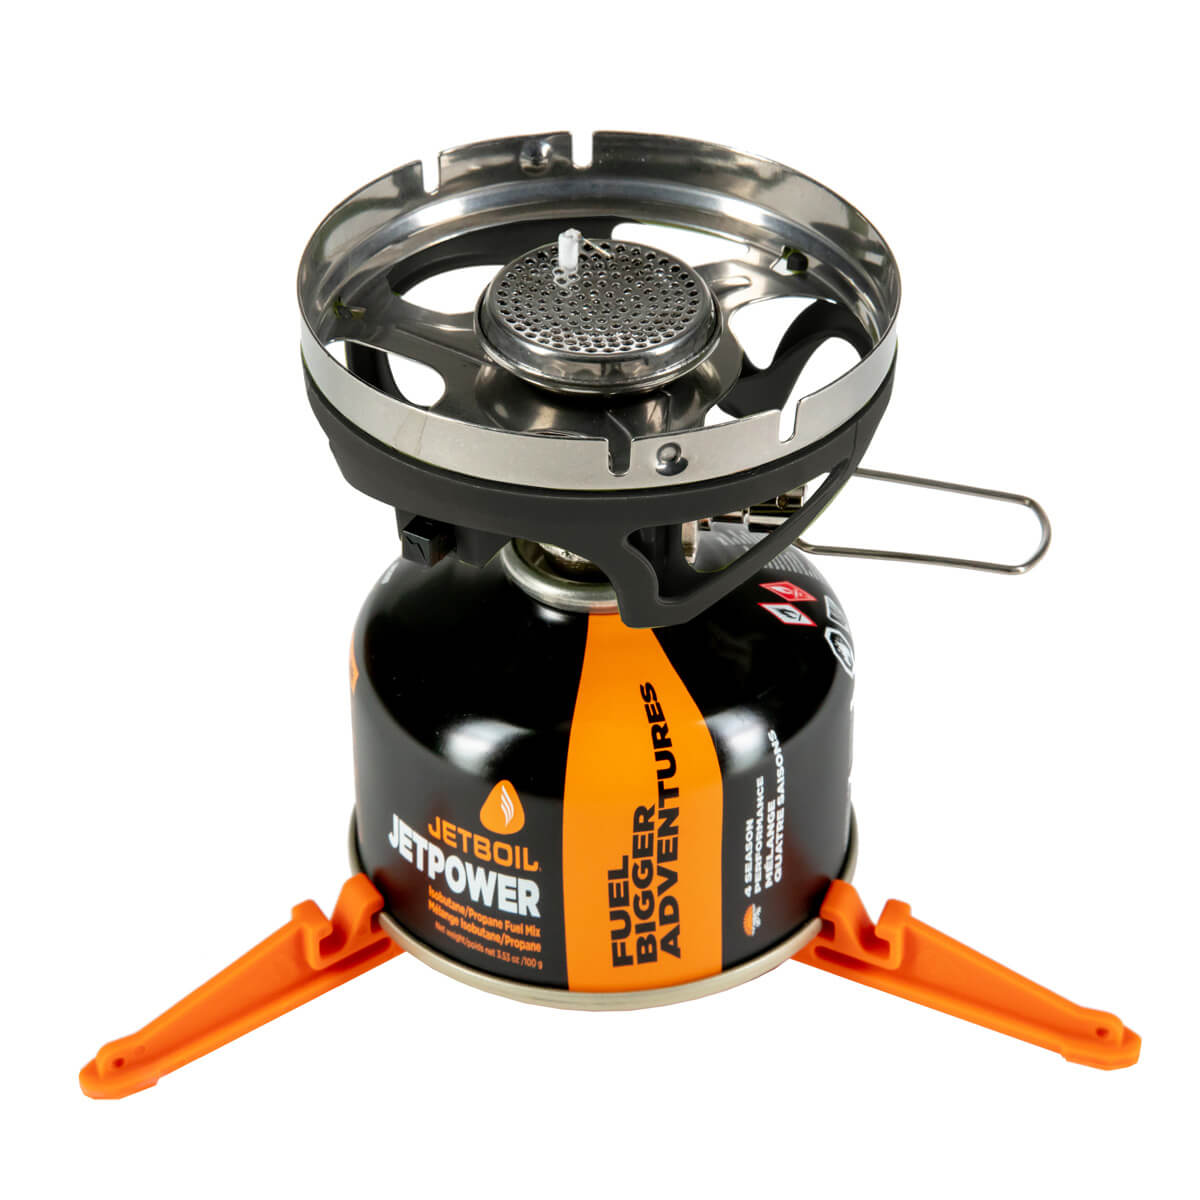 Canister stoves come in both separate and integrated varieties. Lightweight backpackers love Jetboil-type integrated stove systems. They use heat exchangers for much faster heating, but can only be used with their own compatible cookware and accessories.